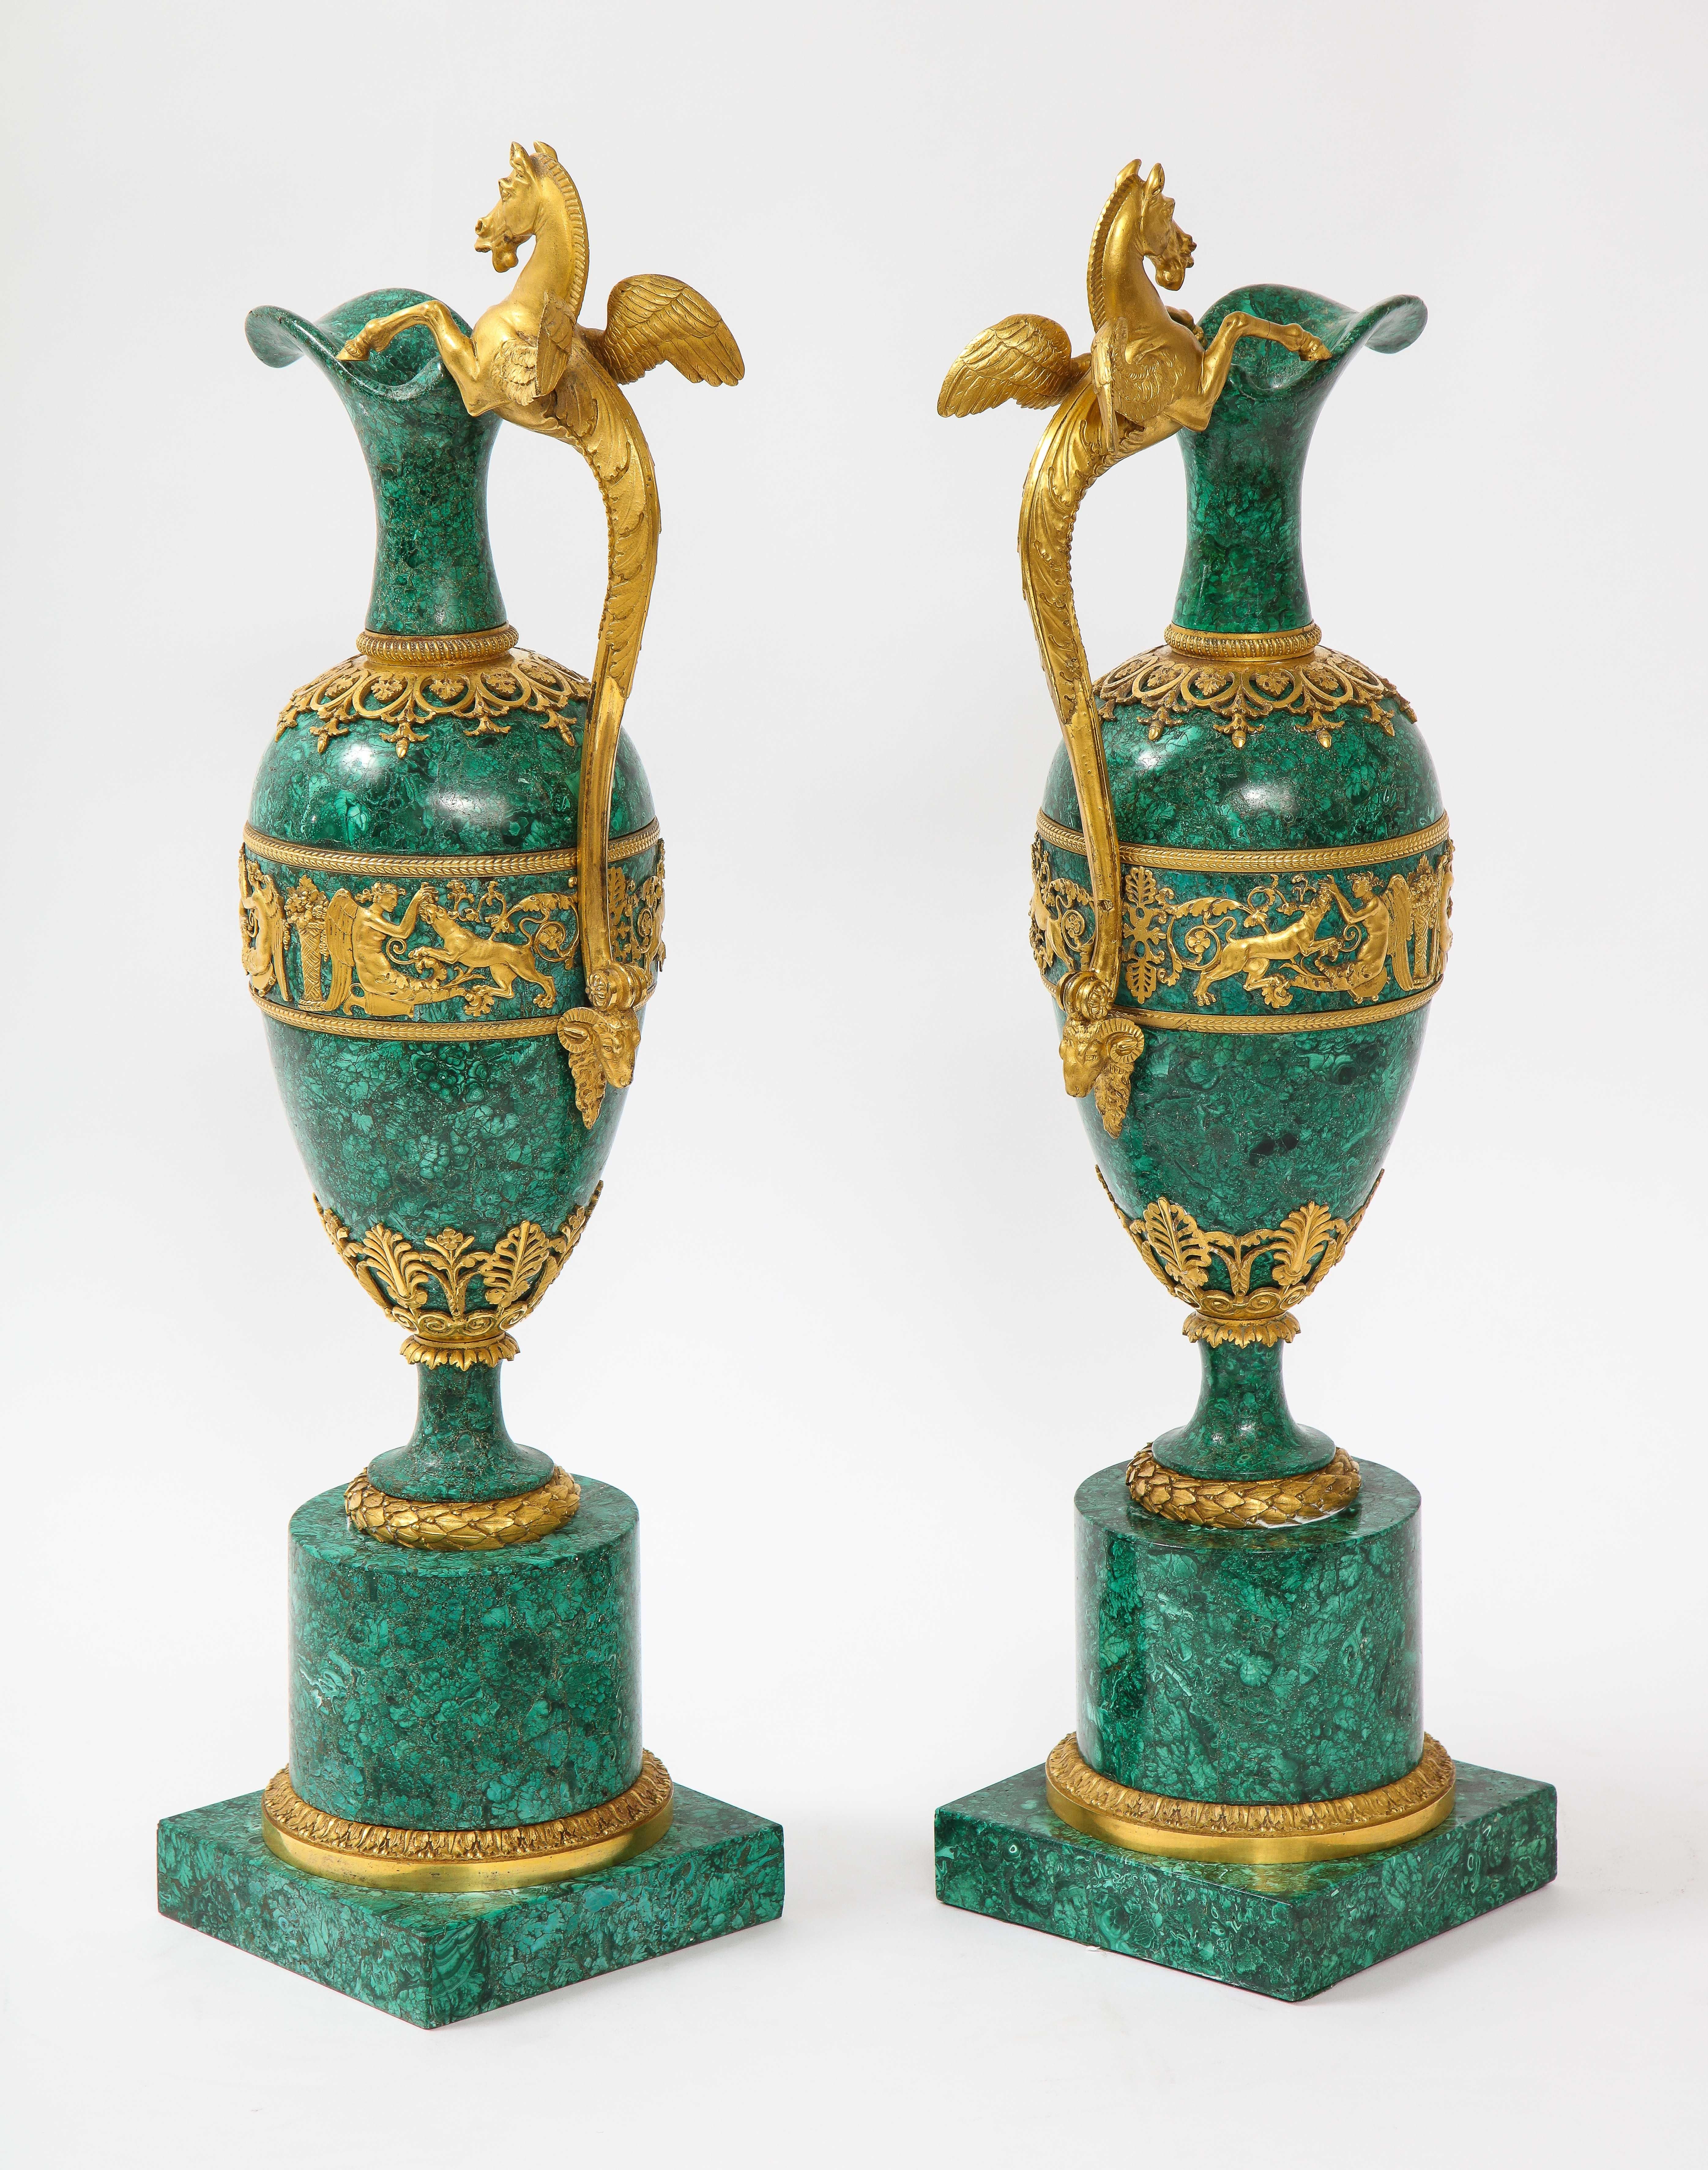 Empire Ormolu-Mounted Malachite Ewers Attributed to Claude Galle, Russian, Pair 1